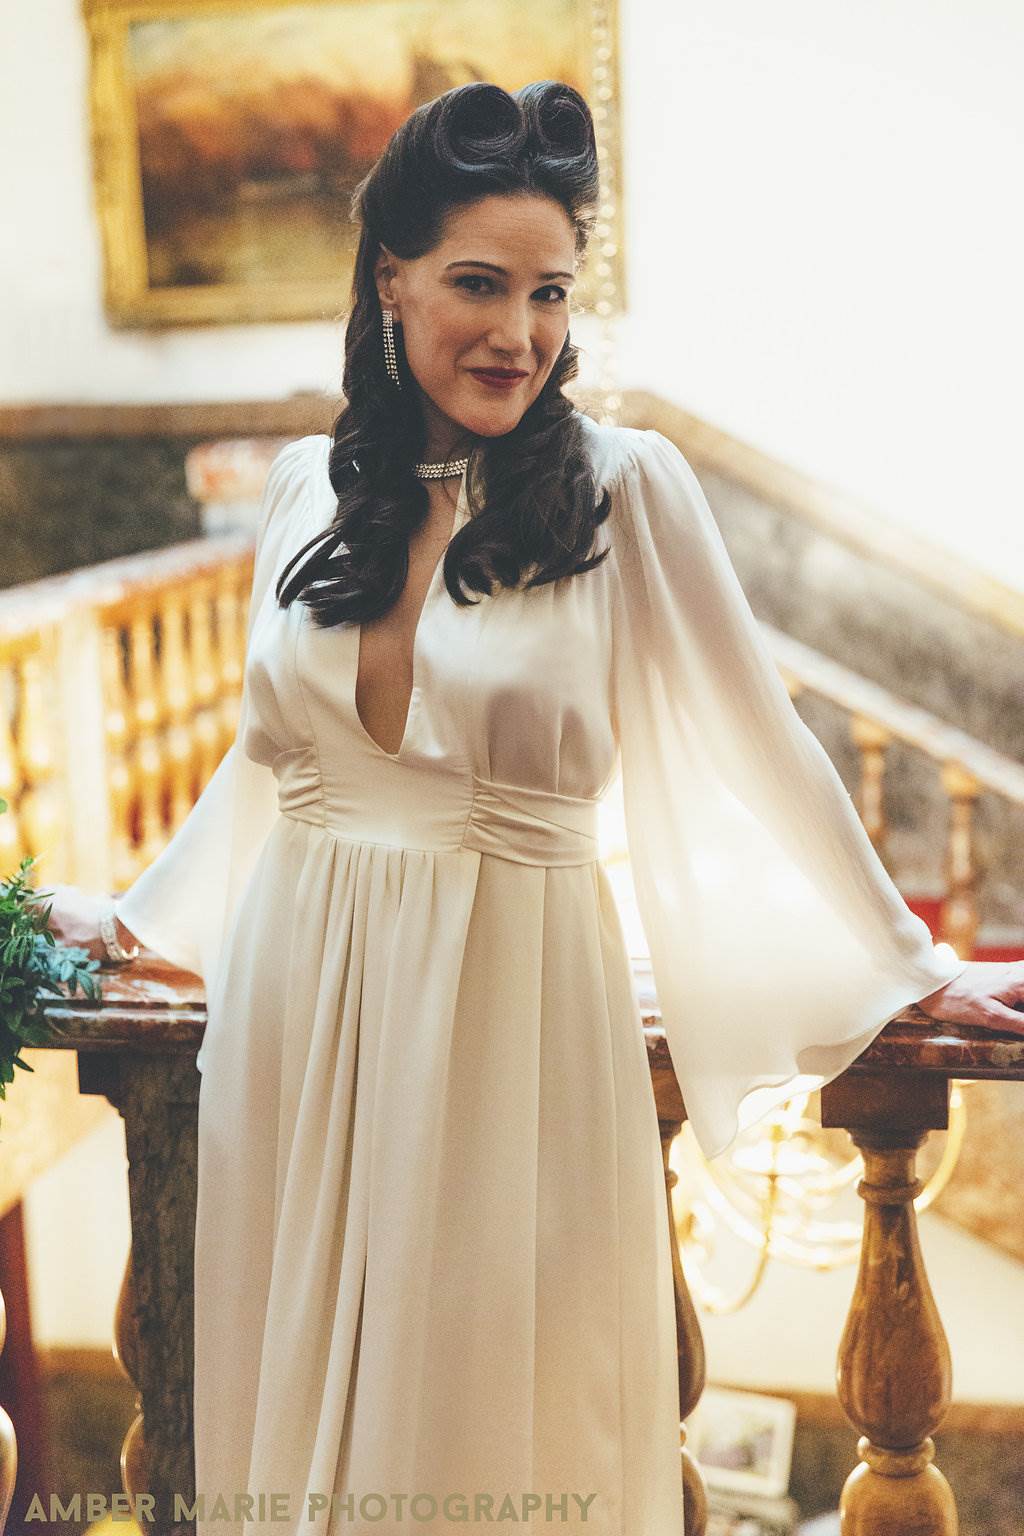 Vintage wedding dresses at the fashion parade photo by Amber Marie Photography at the National Vintage Wedding Fair